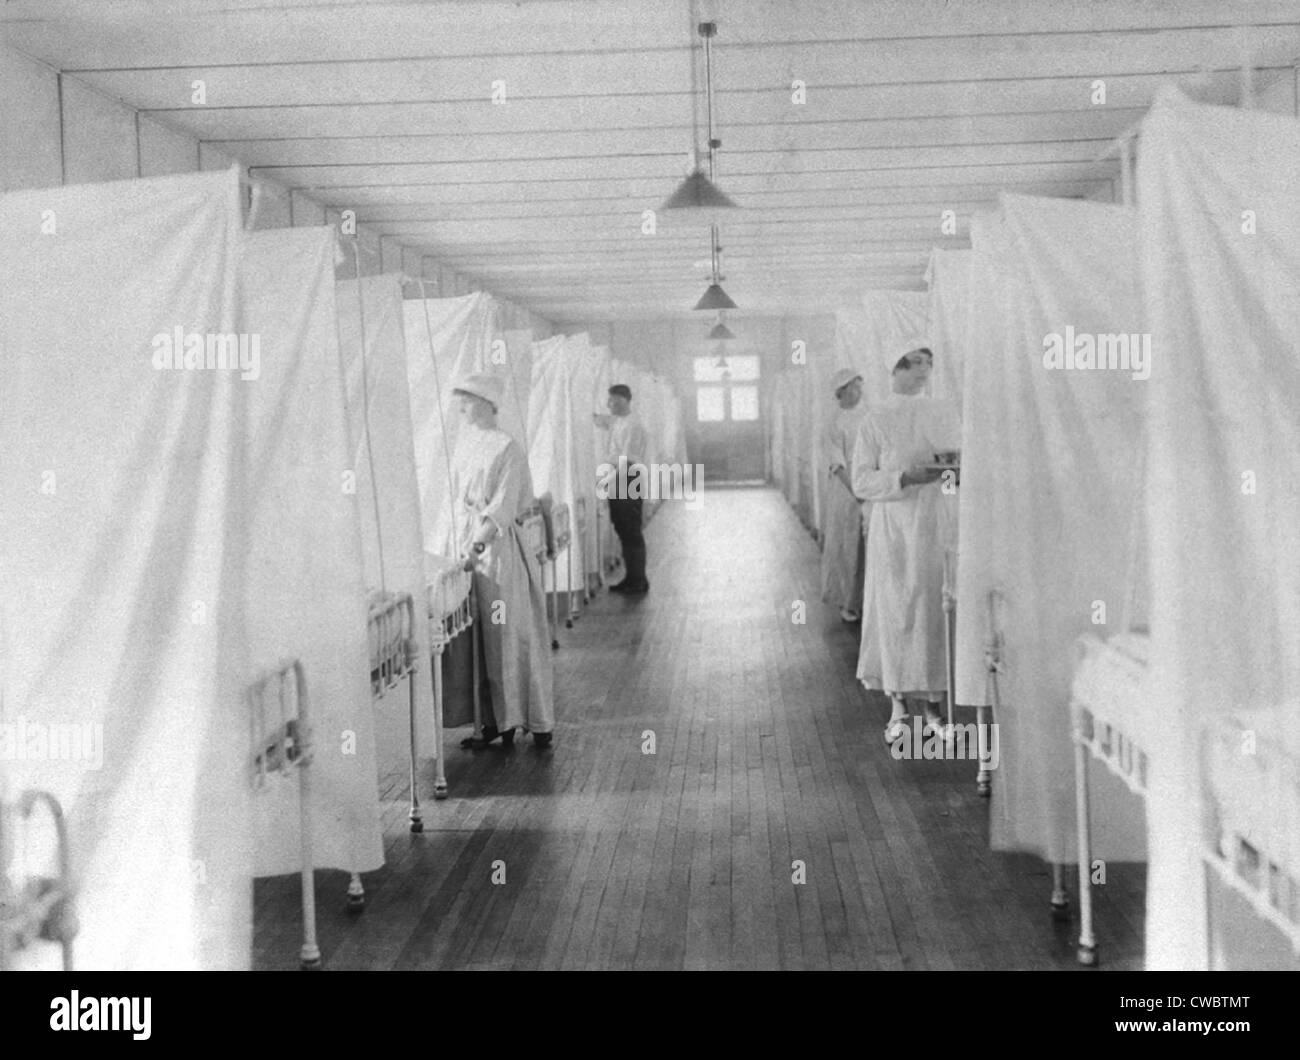 Spanish Flu Epidemic 1918-19. Nurses and orderlies stand by beds separated by sheets to isolate patients in the Stock Photo